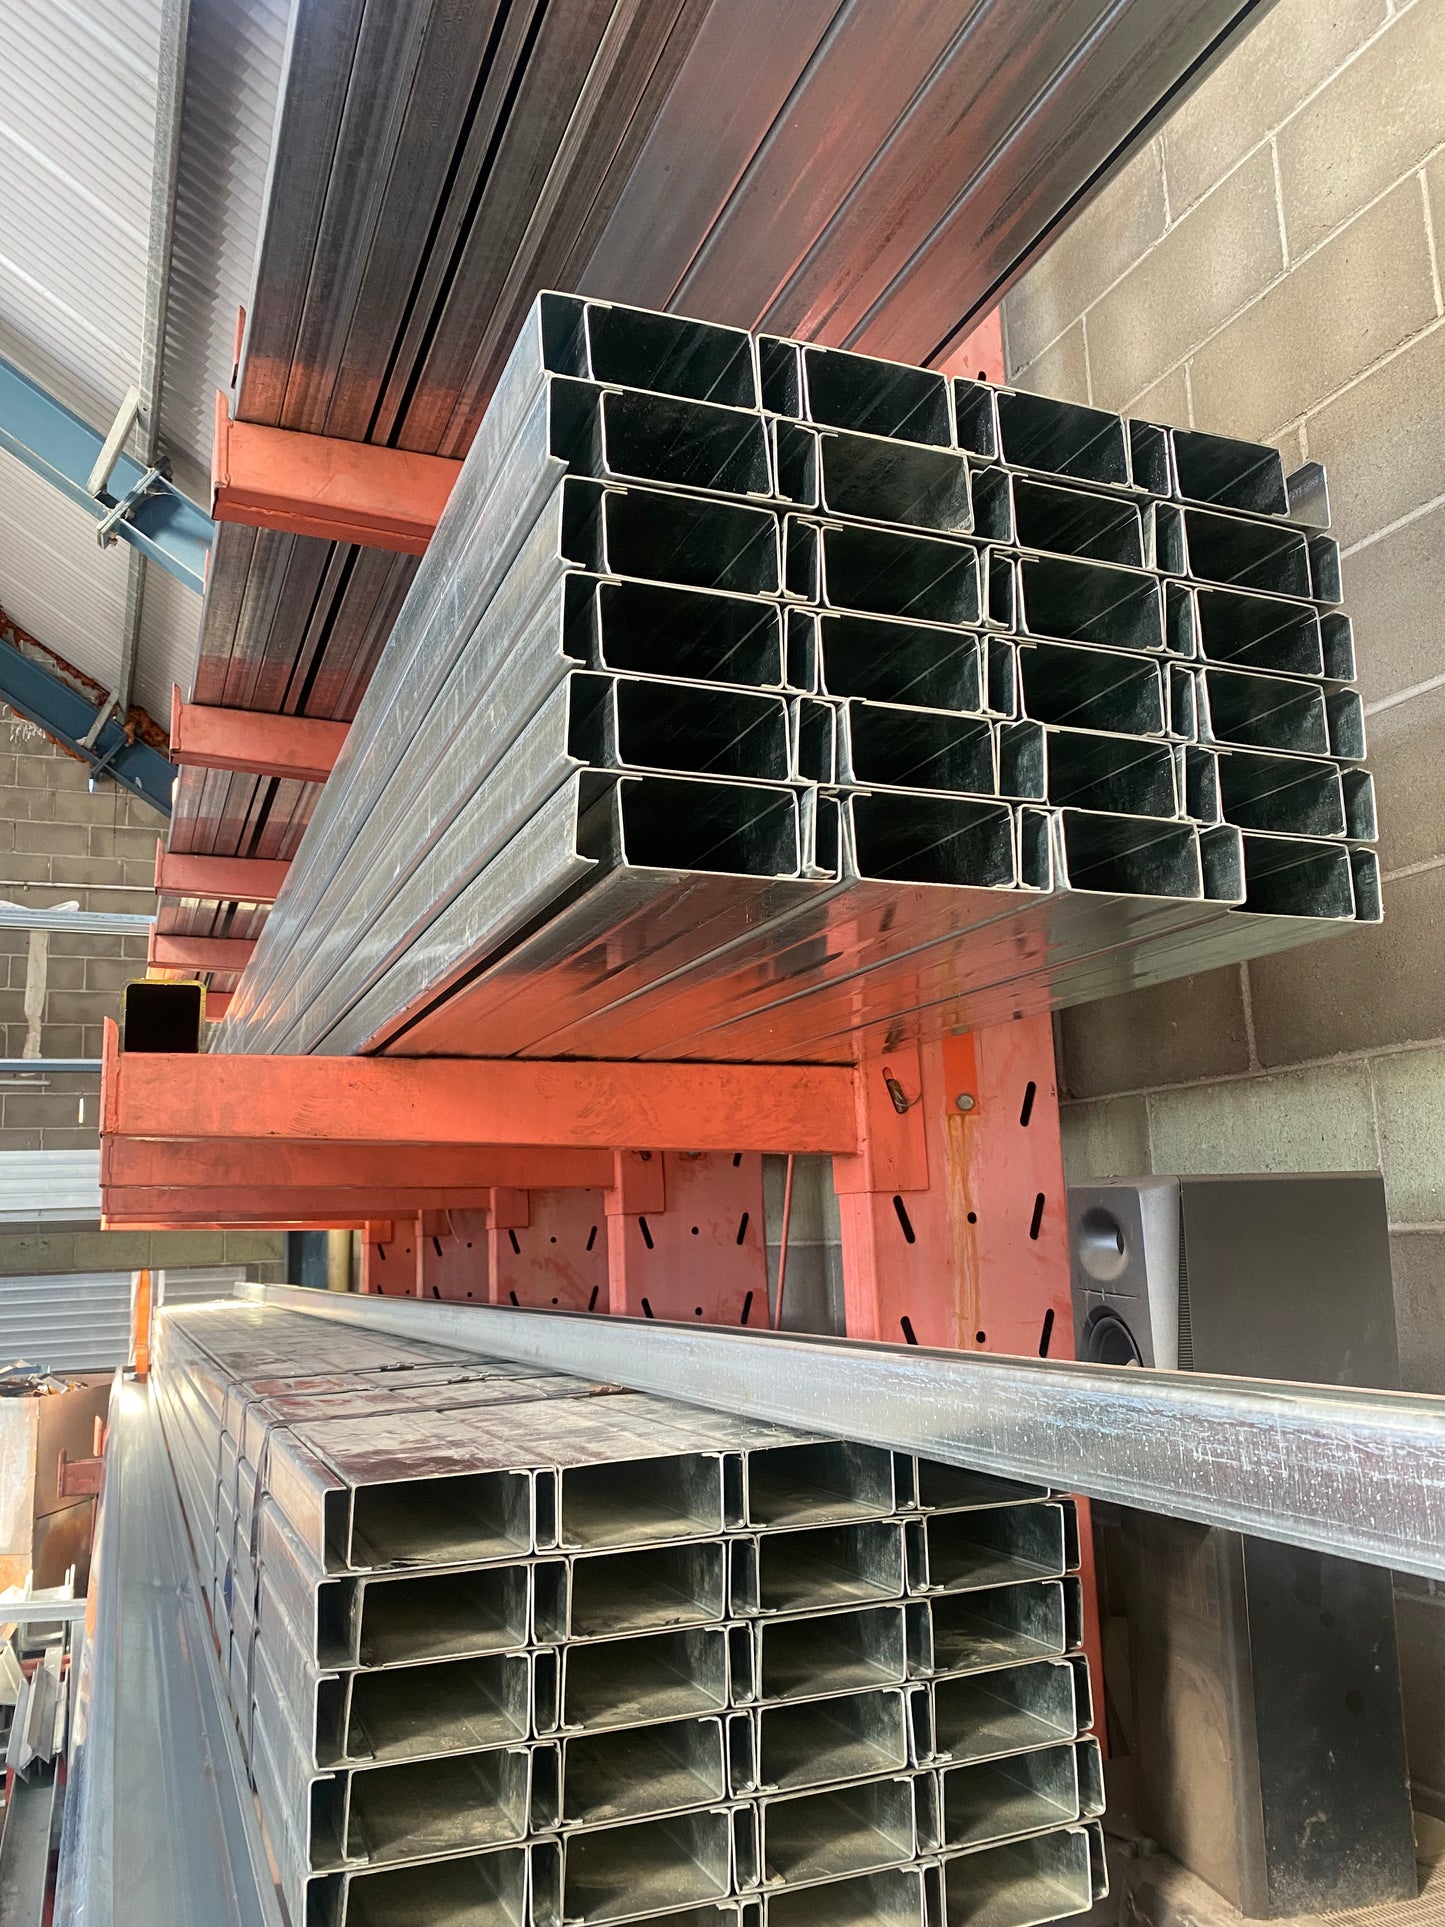 Galvanised C Purlins, Brackets, Top hats ( 6m and 8m length)